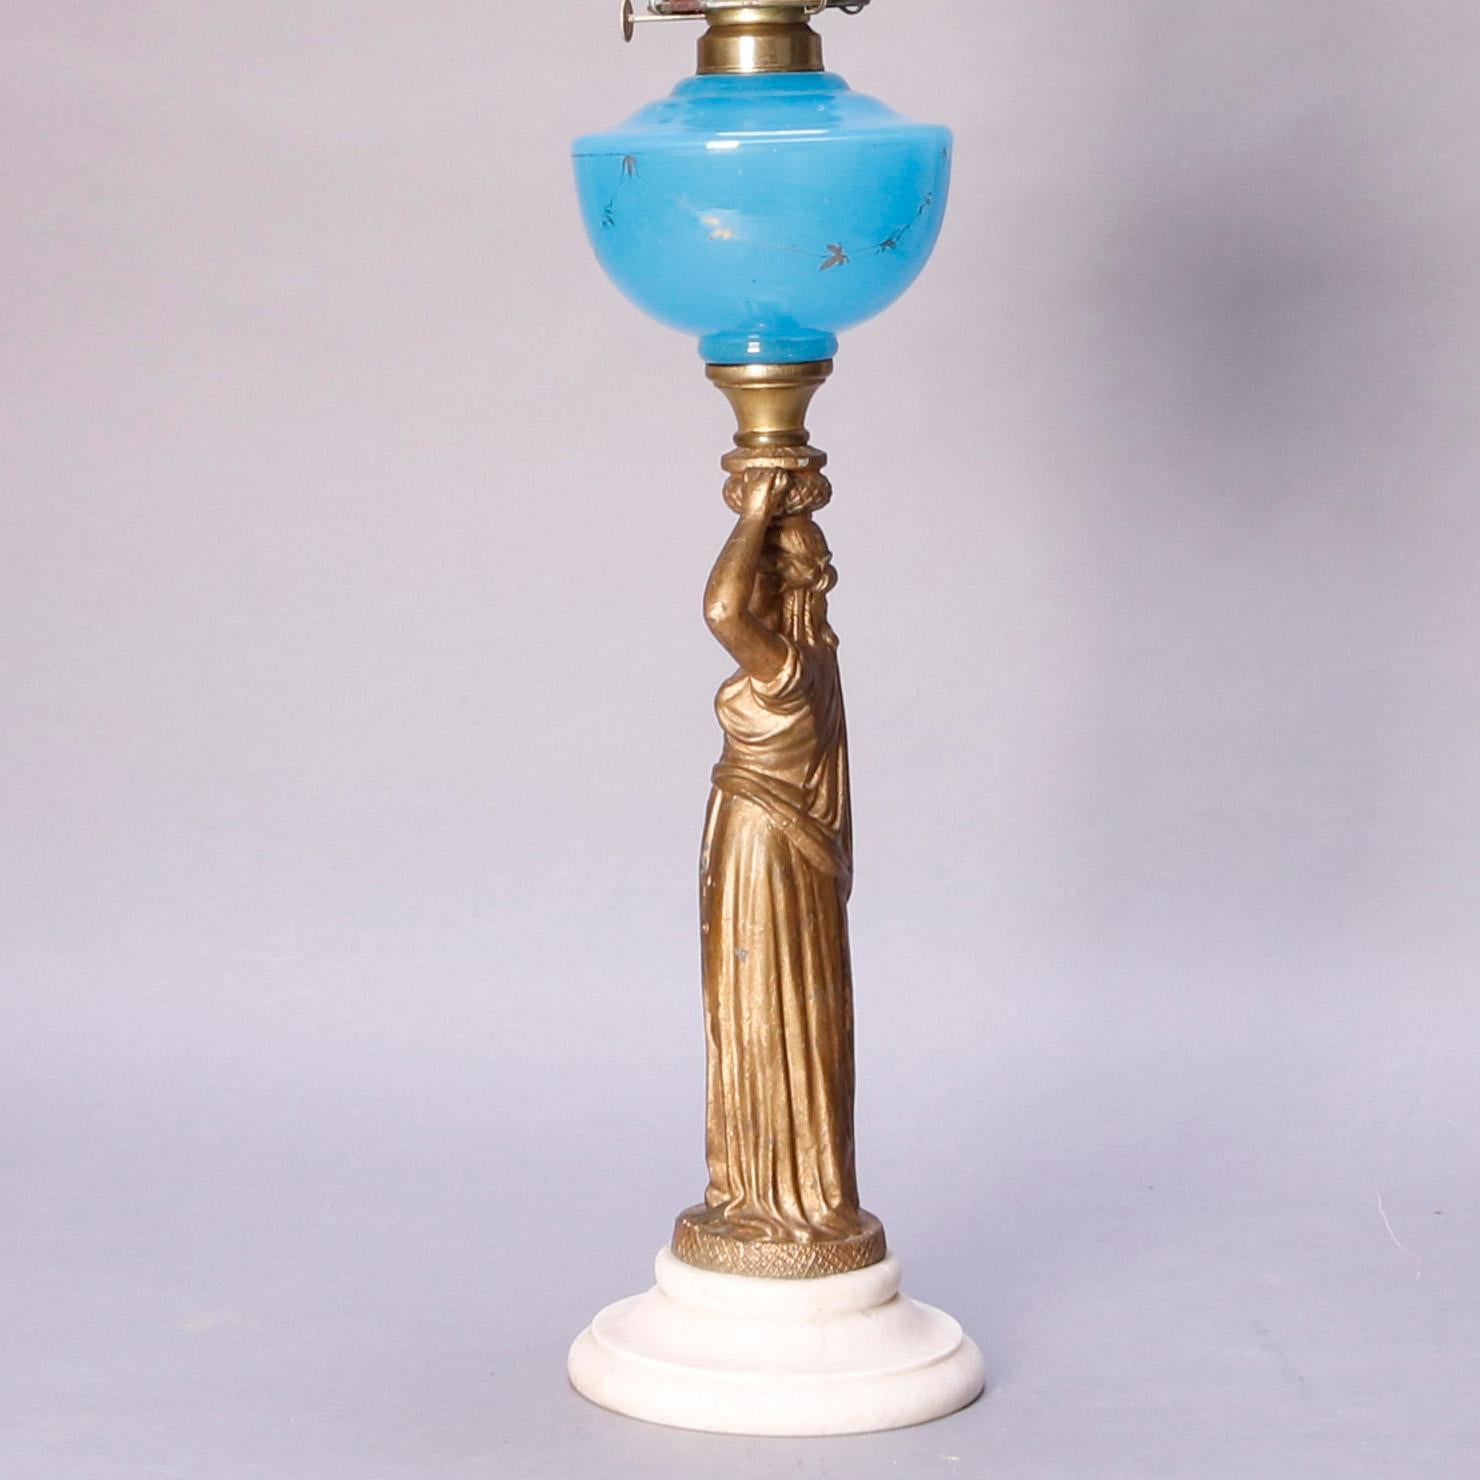 Antique Figural Bronze Gone with the Wind Gilt Art Glass Oil Lamp, circa 1890 3